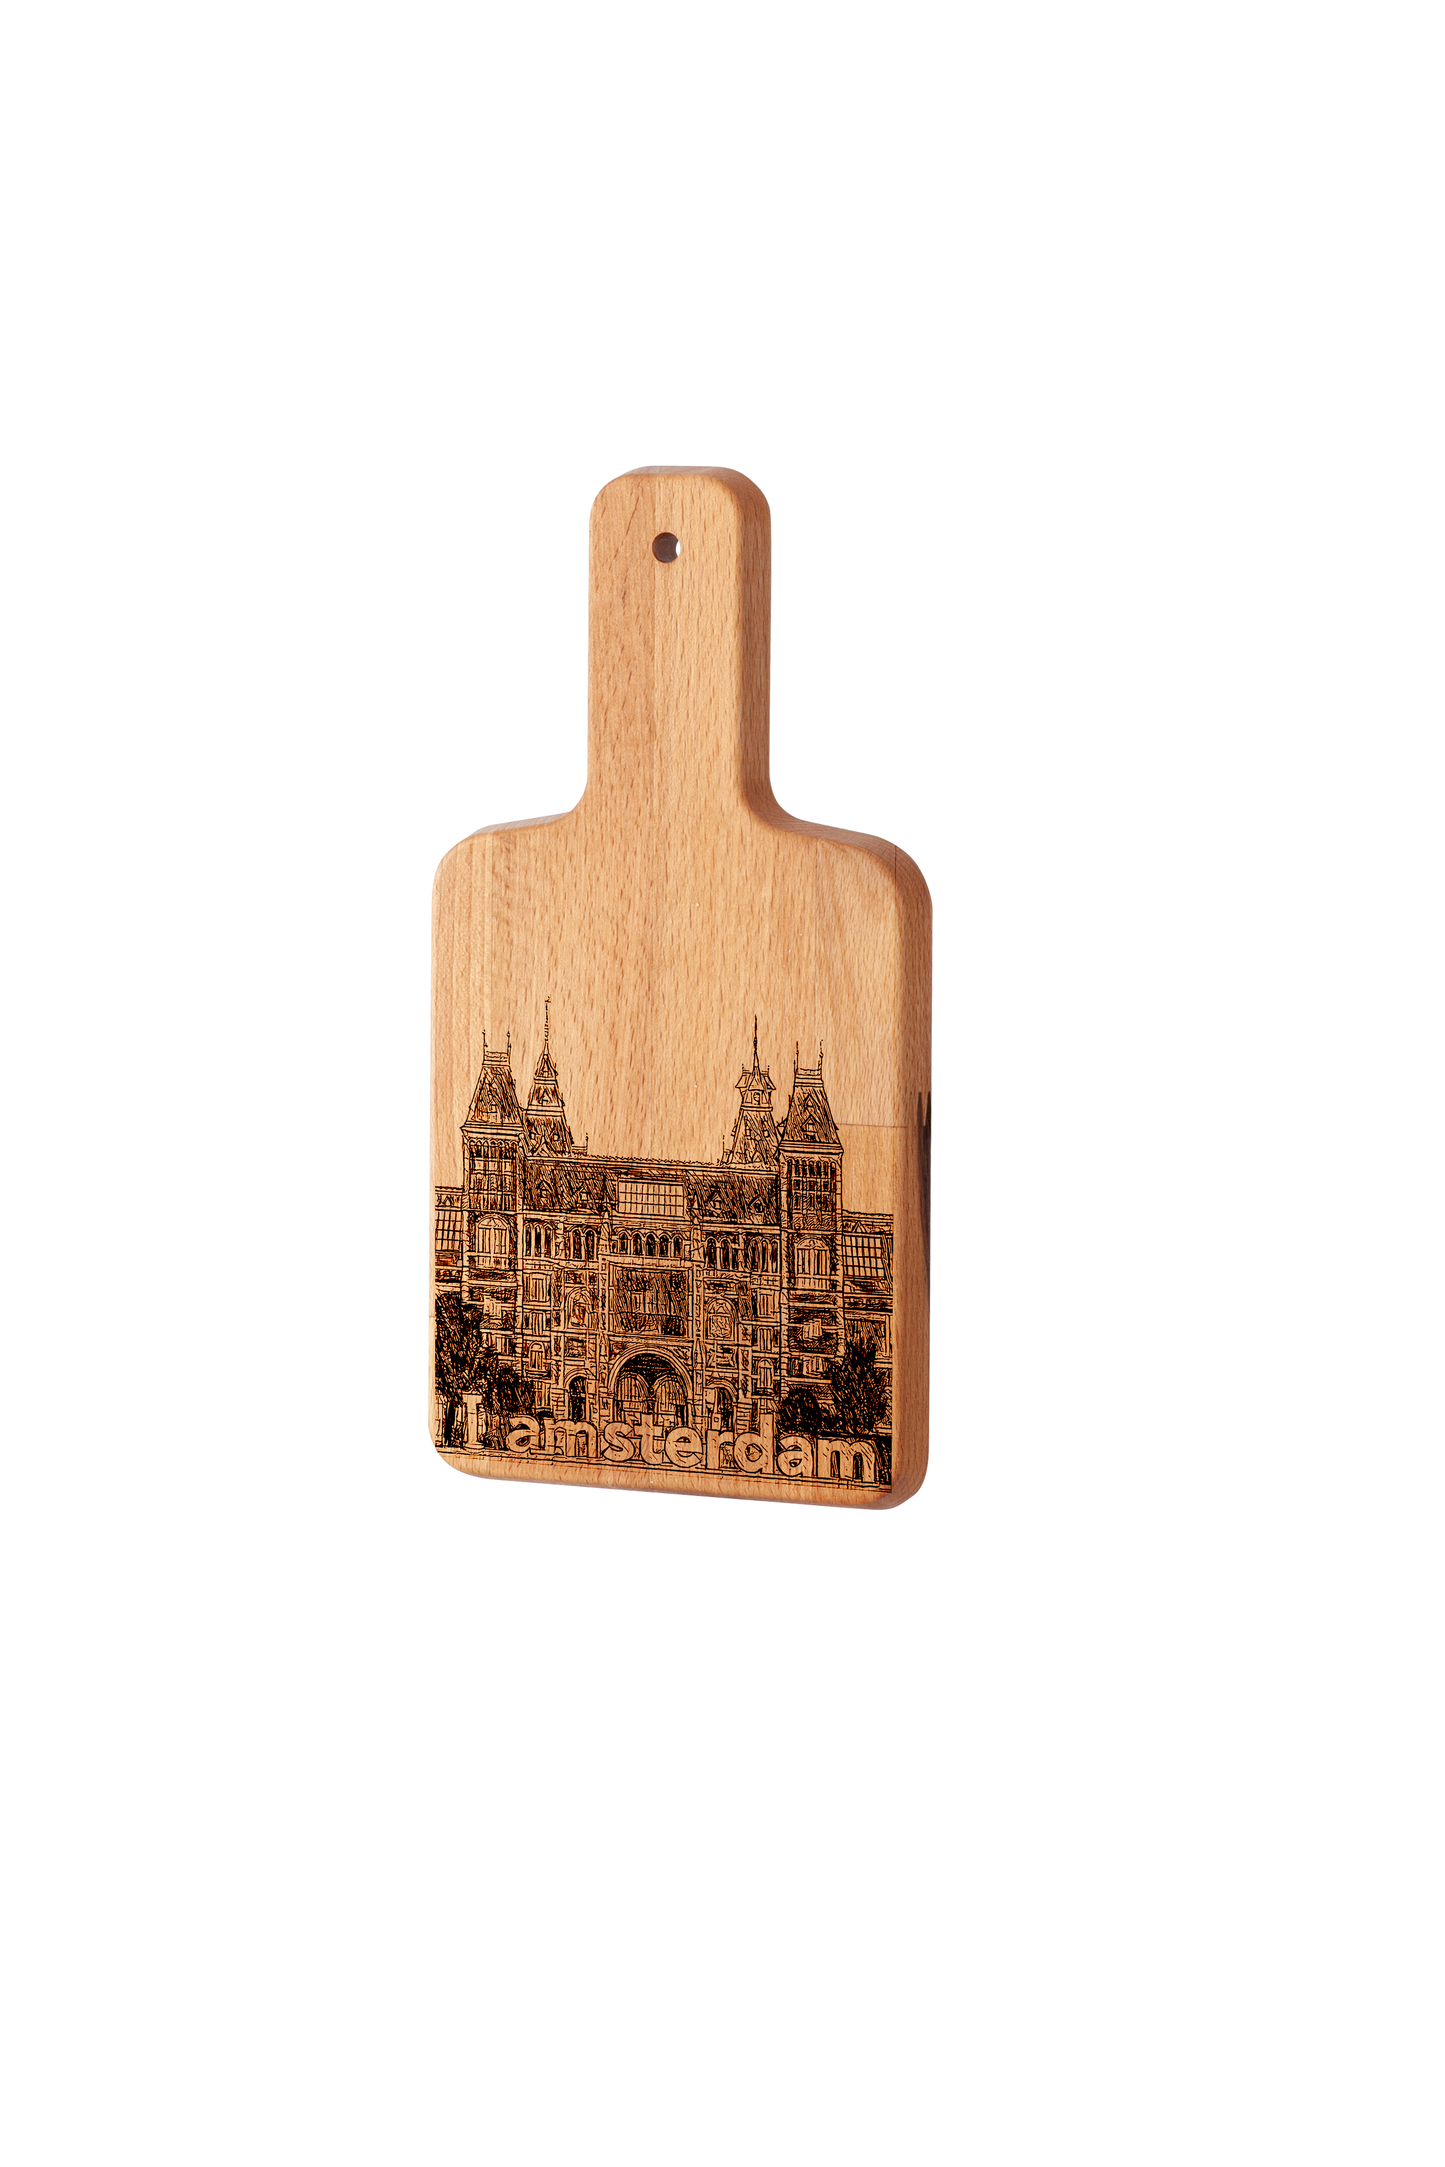 Amsterdam, Museumplein, cheese board, side view